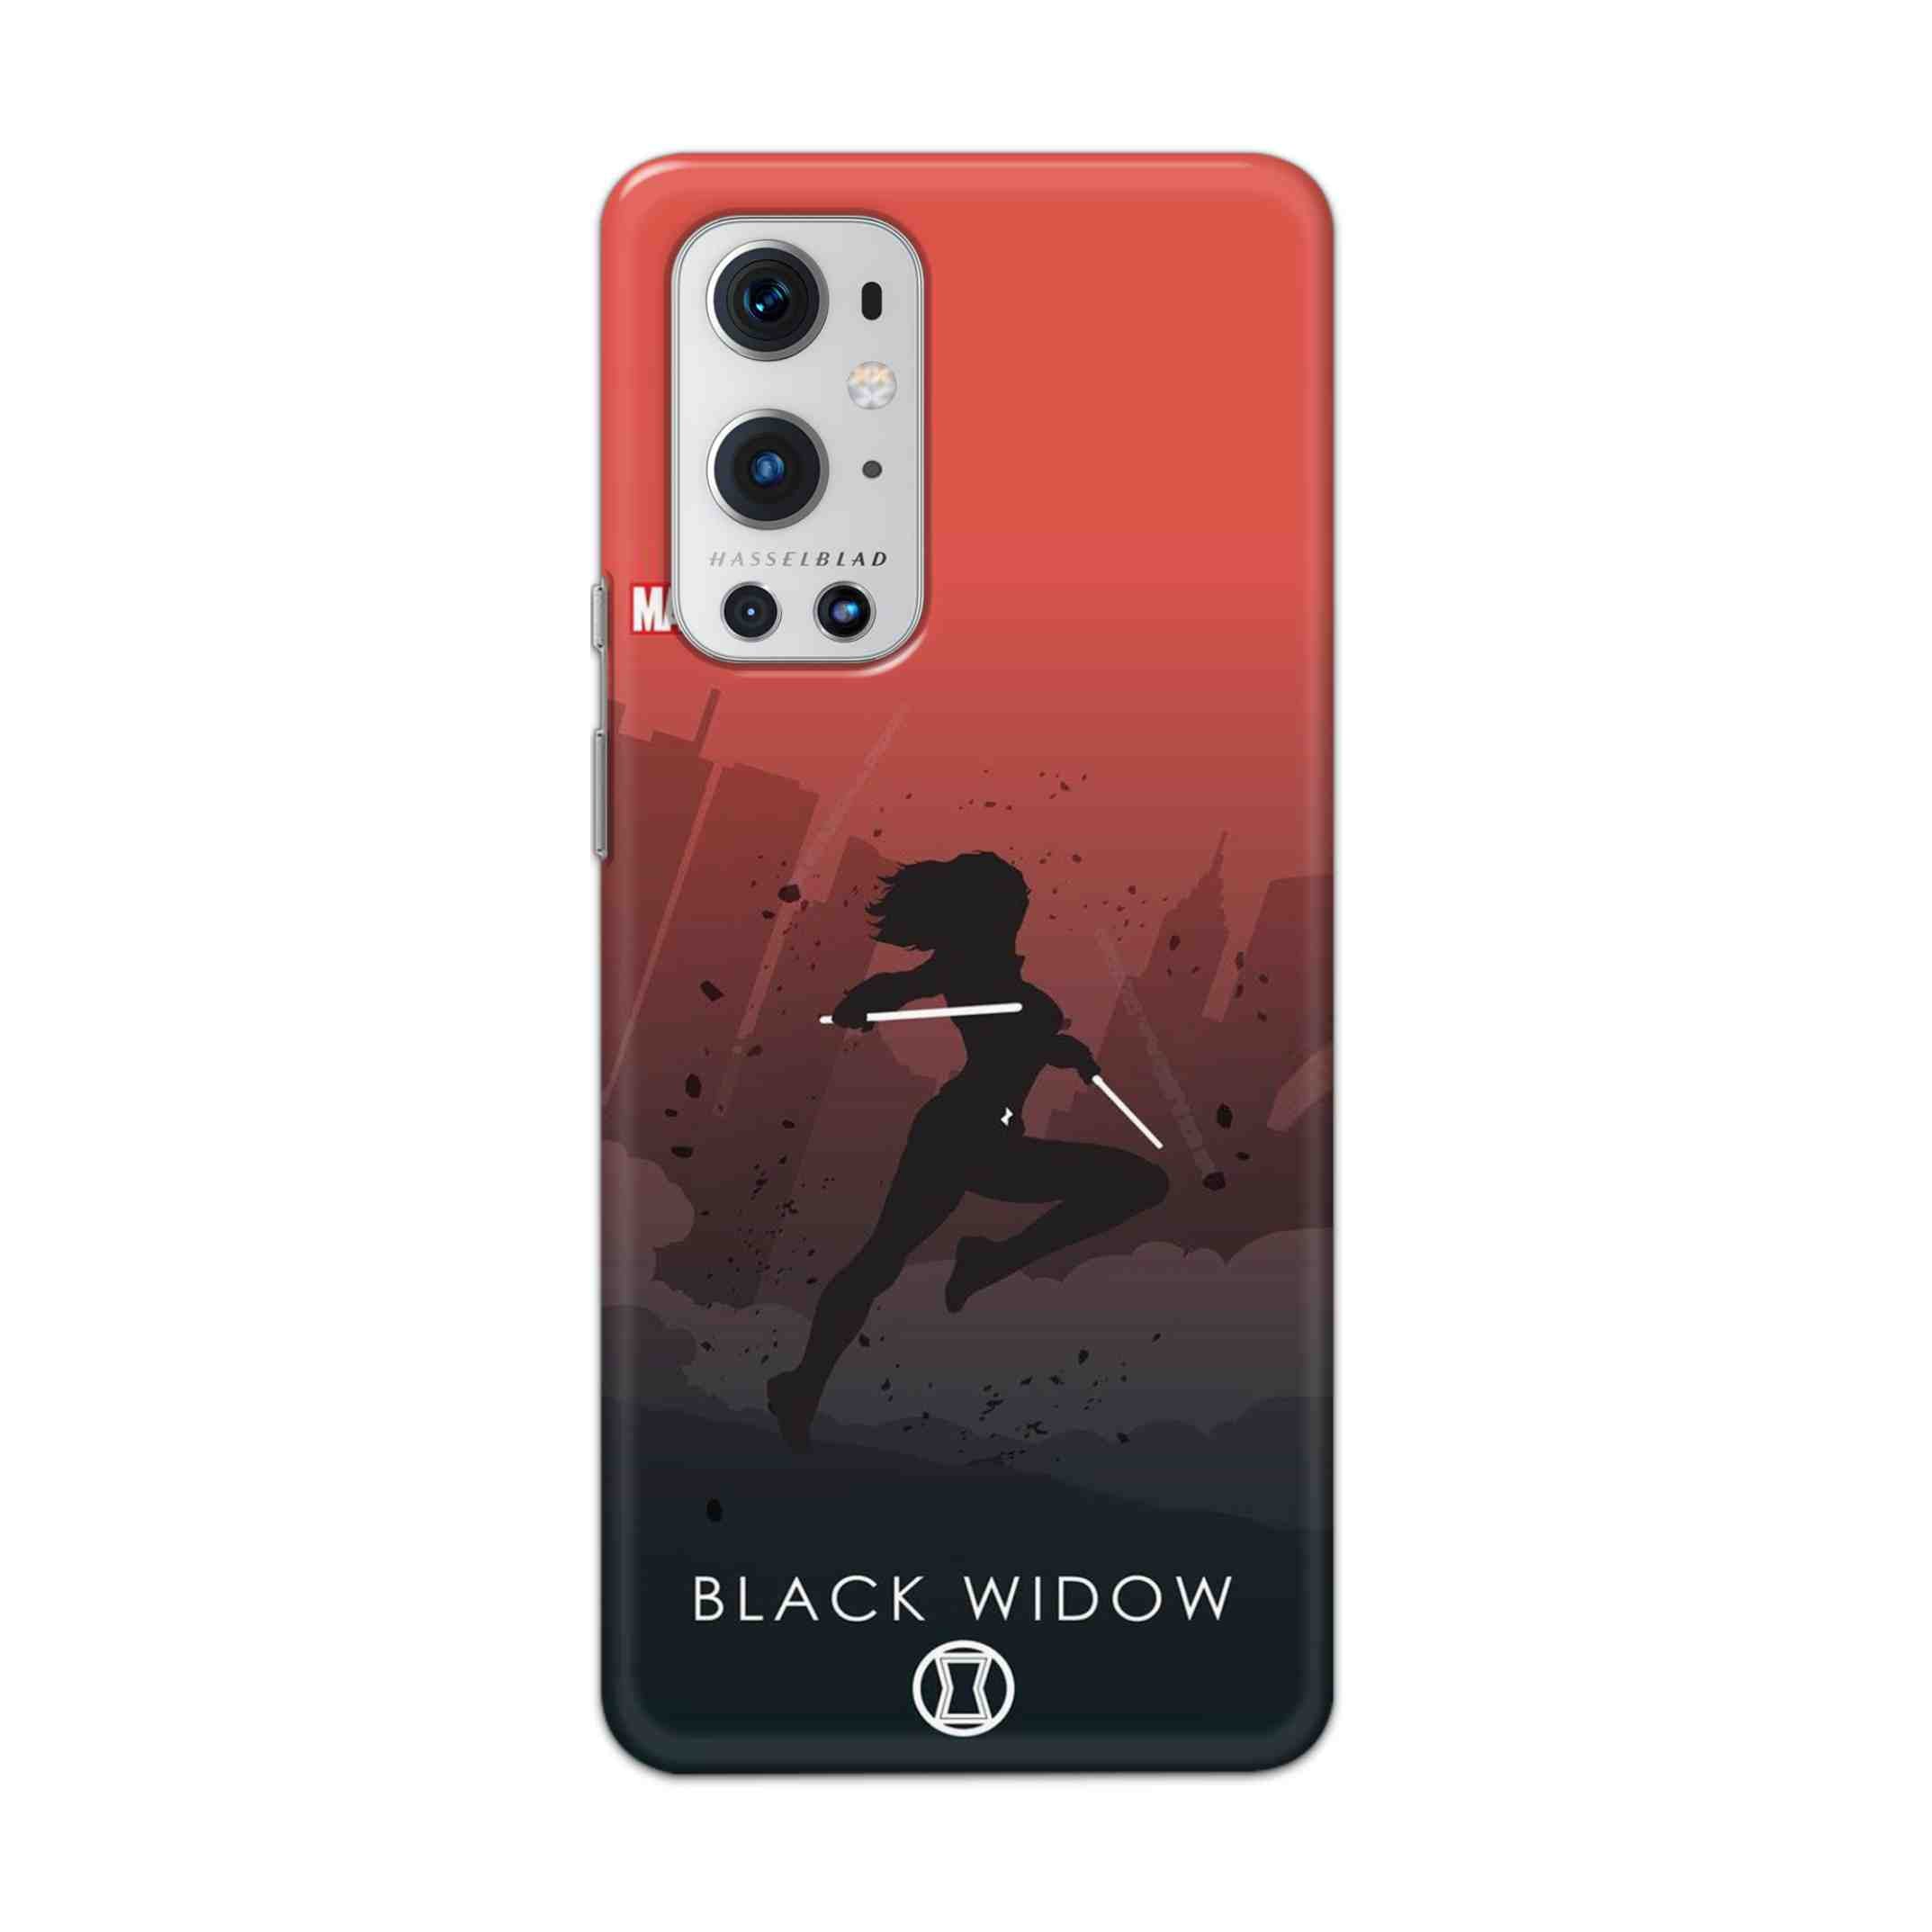 Buy Black Widow Hard Back Mobile Phone Case Cover For OnePlus 9 Pro Online